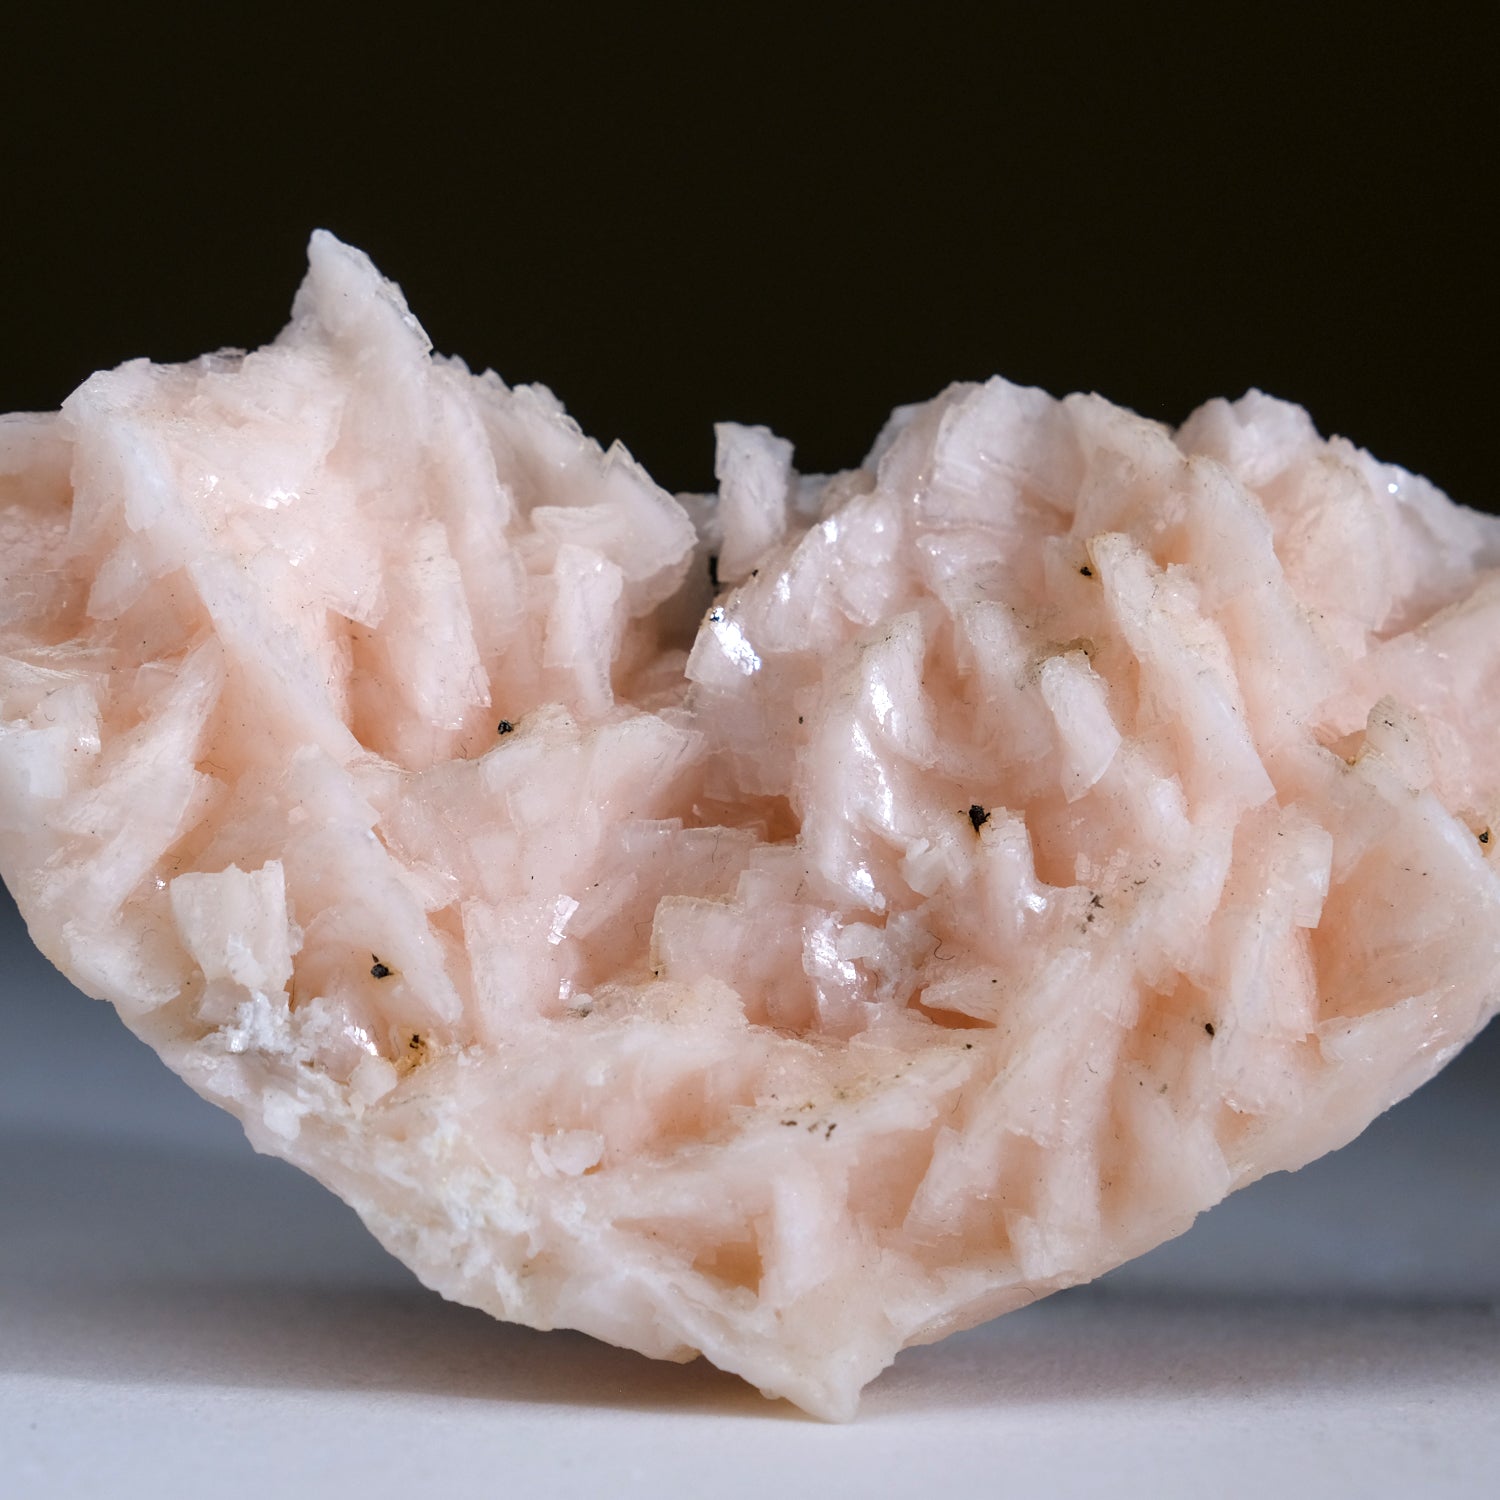 Pink Dolomite Crystal Cluster from Morocco (77.9 grams)